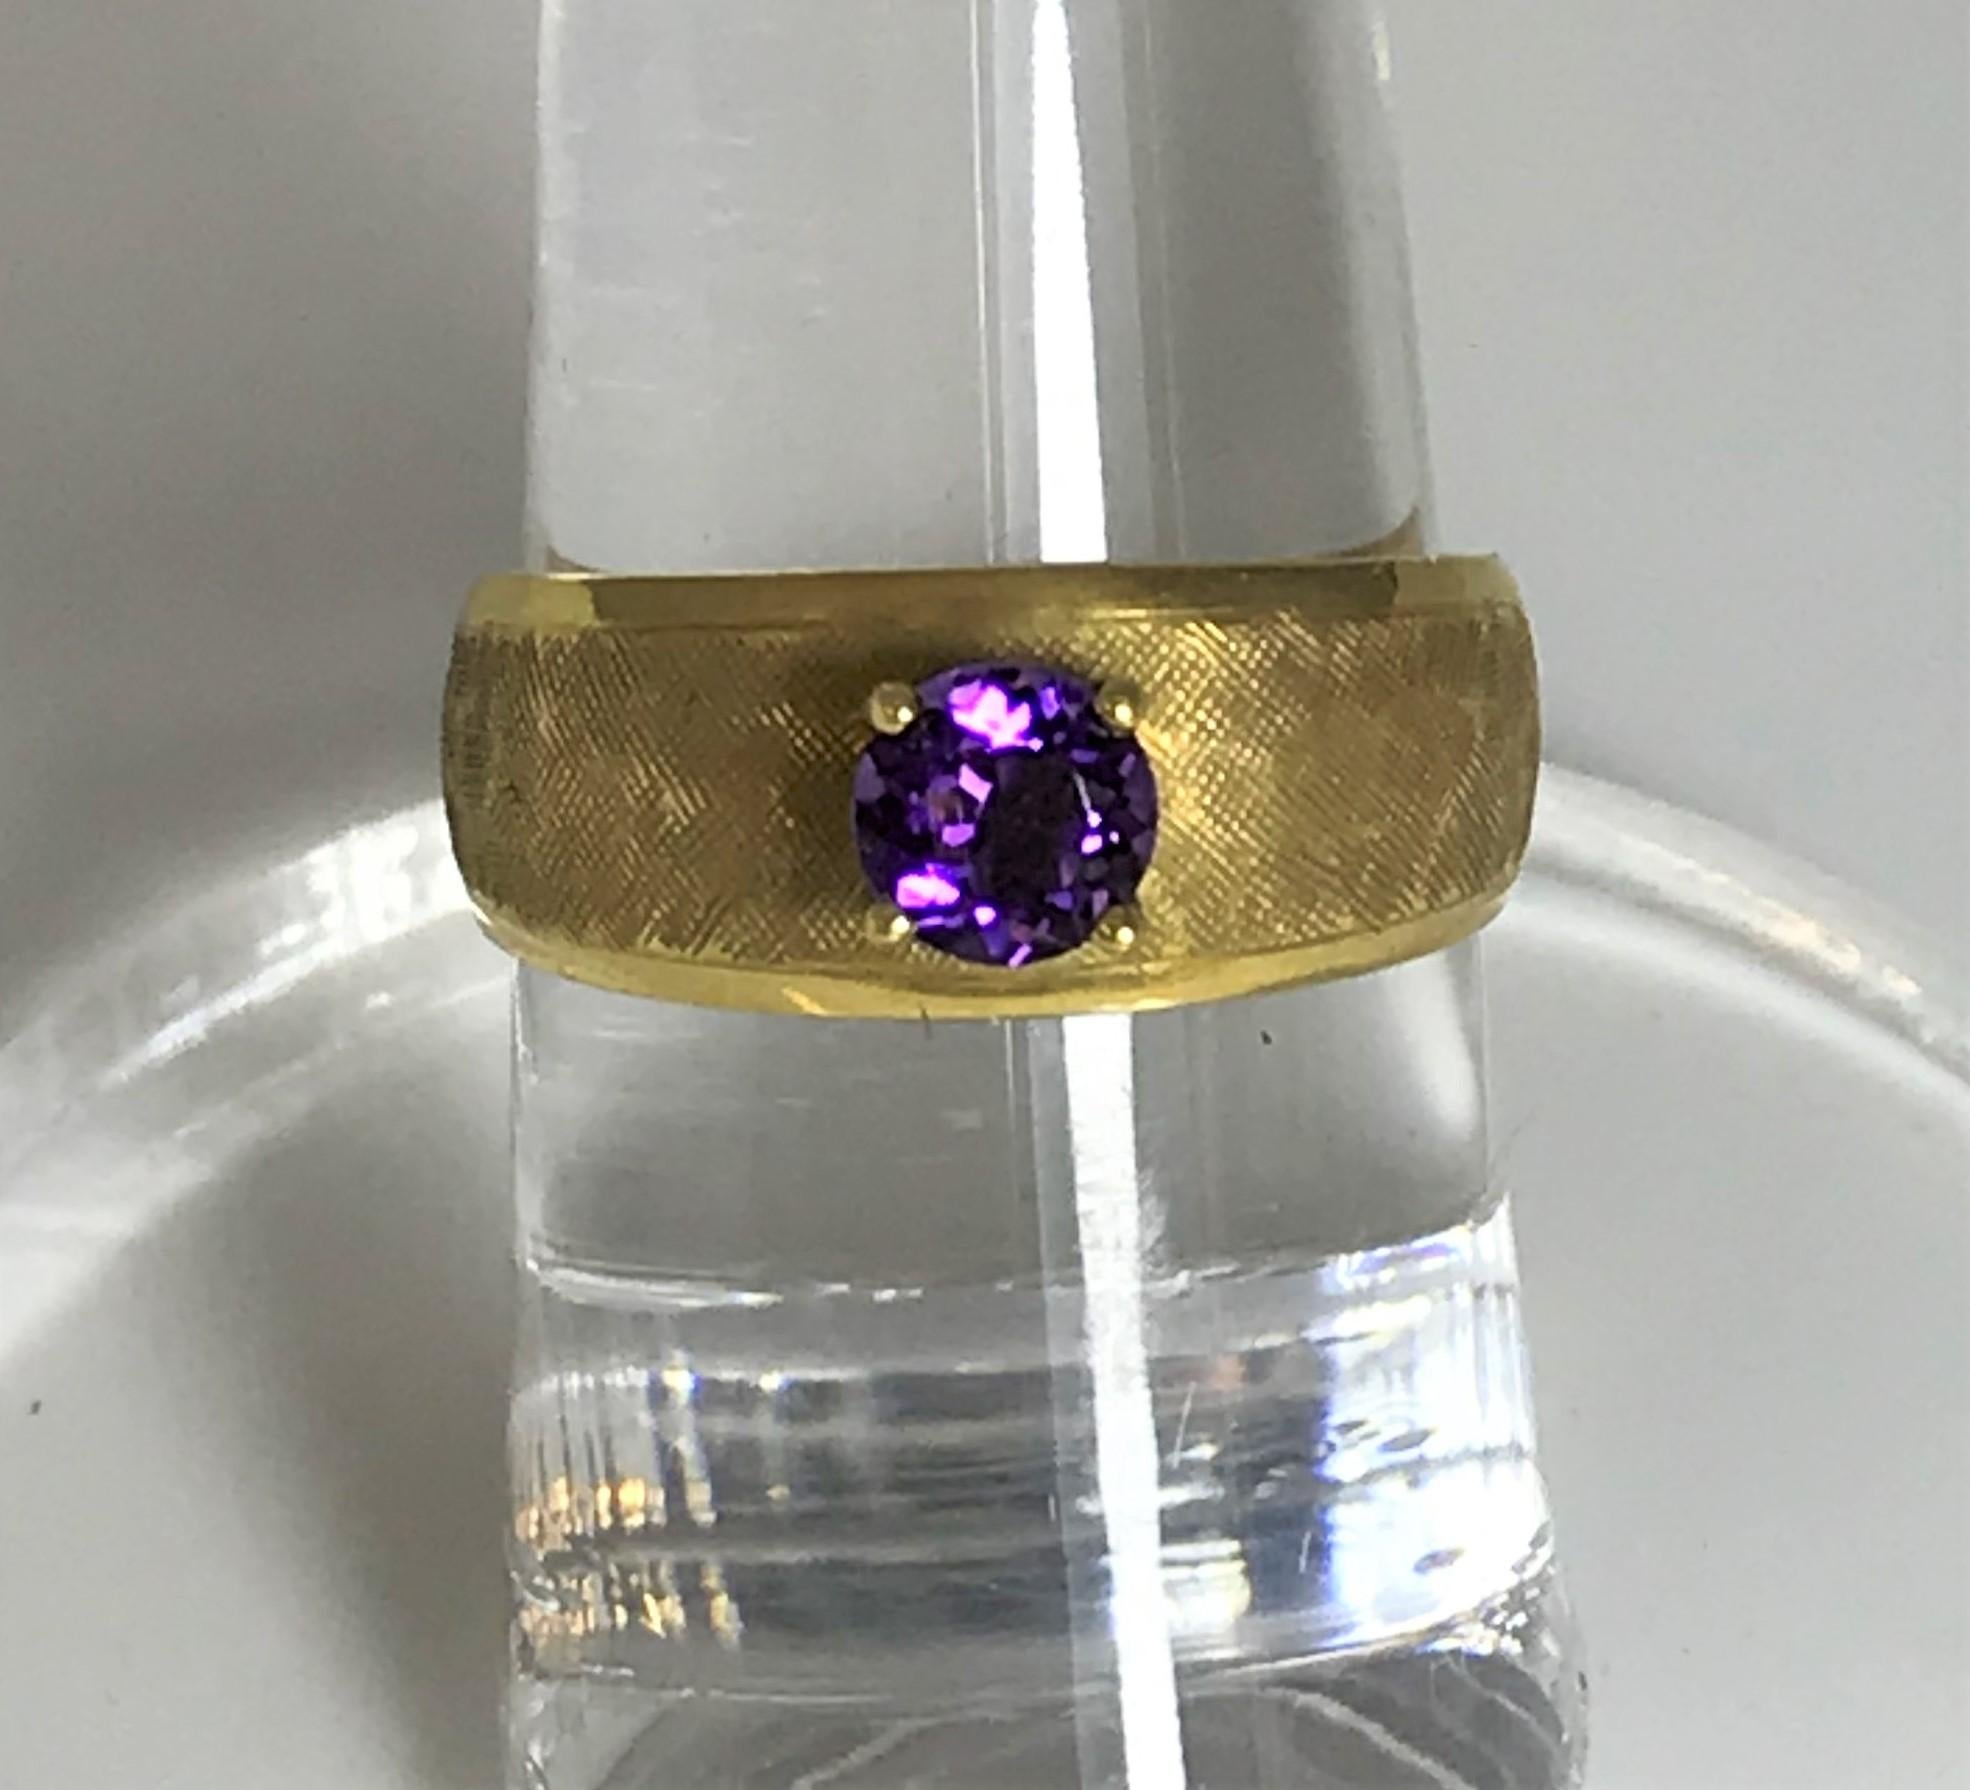 February birthday, engagement, everyday ring that will make anyone smile. 
5mm round amethyst 
4 prong setting
18K yellow gold band measuring approximately 8mm at top, narrowing to 4mm at the bottom
Florentine finish
Size 6.5
